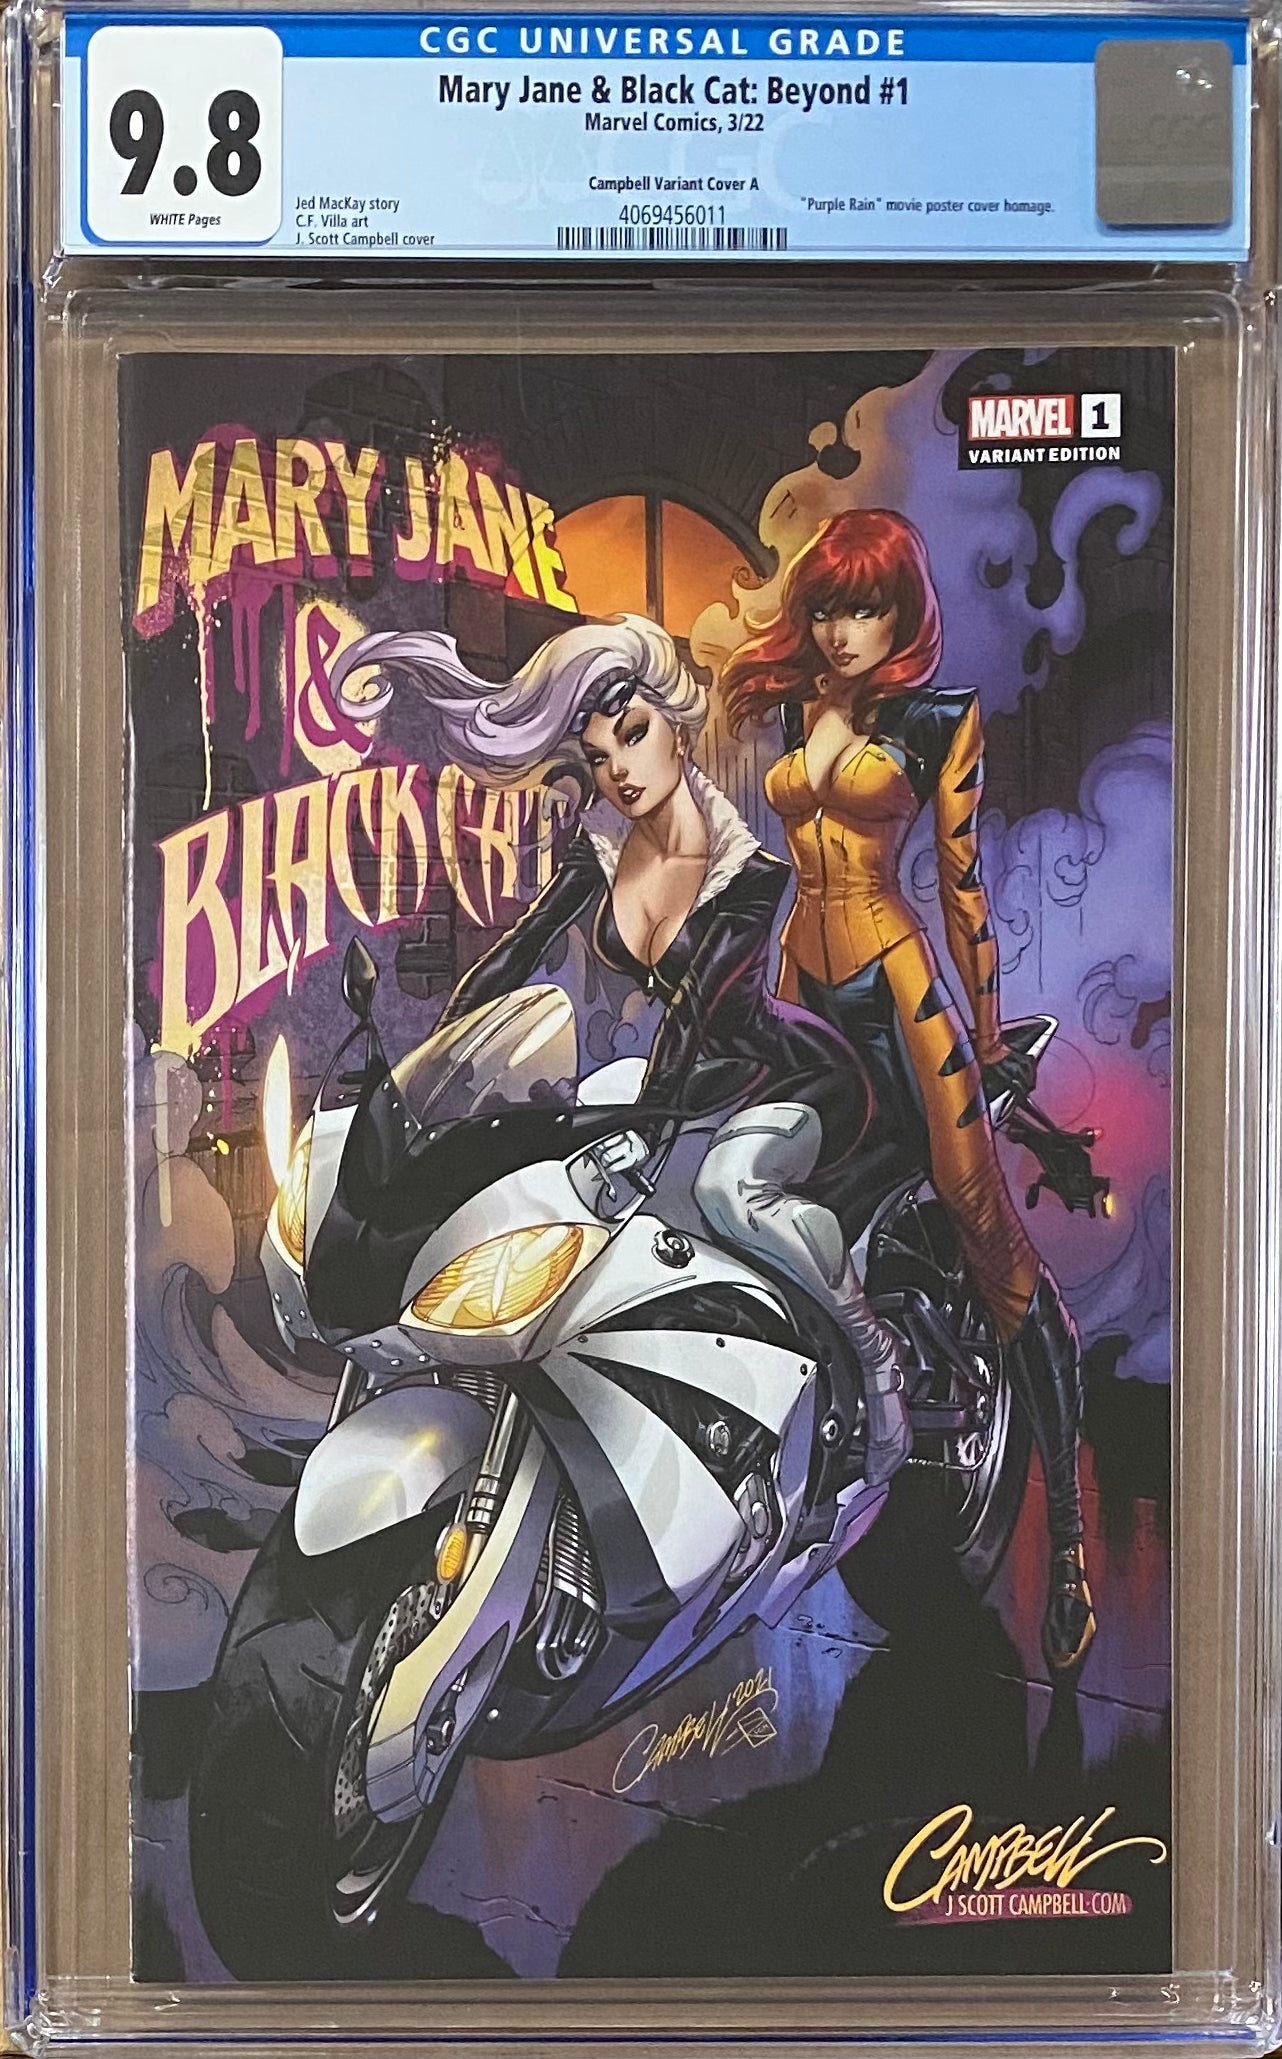 Mary Jane & Black Cat: Beyond #1 J. Scott Campbell Edition A "Catcycle" CGC 9.8